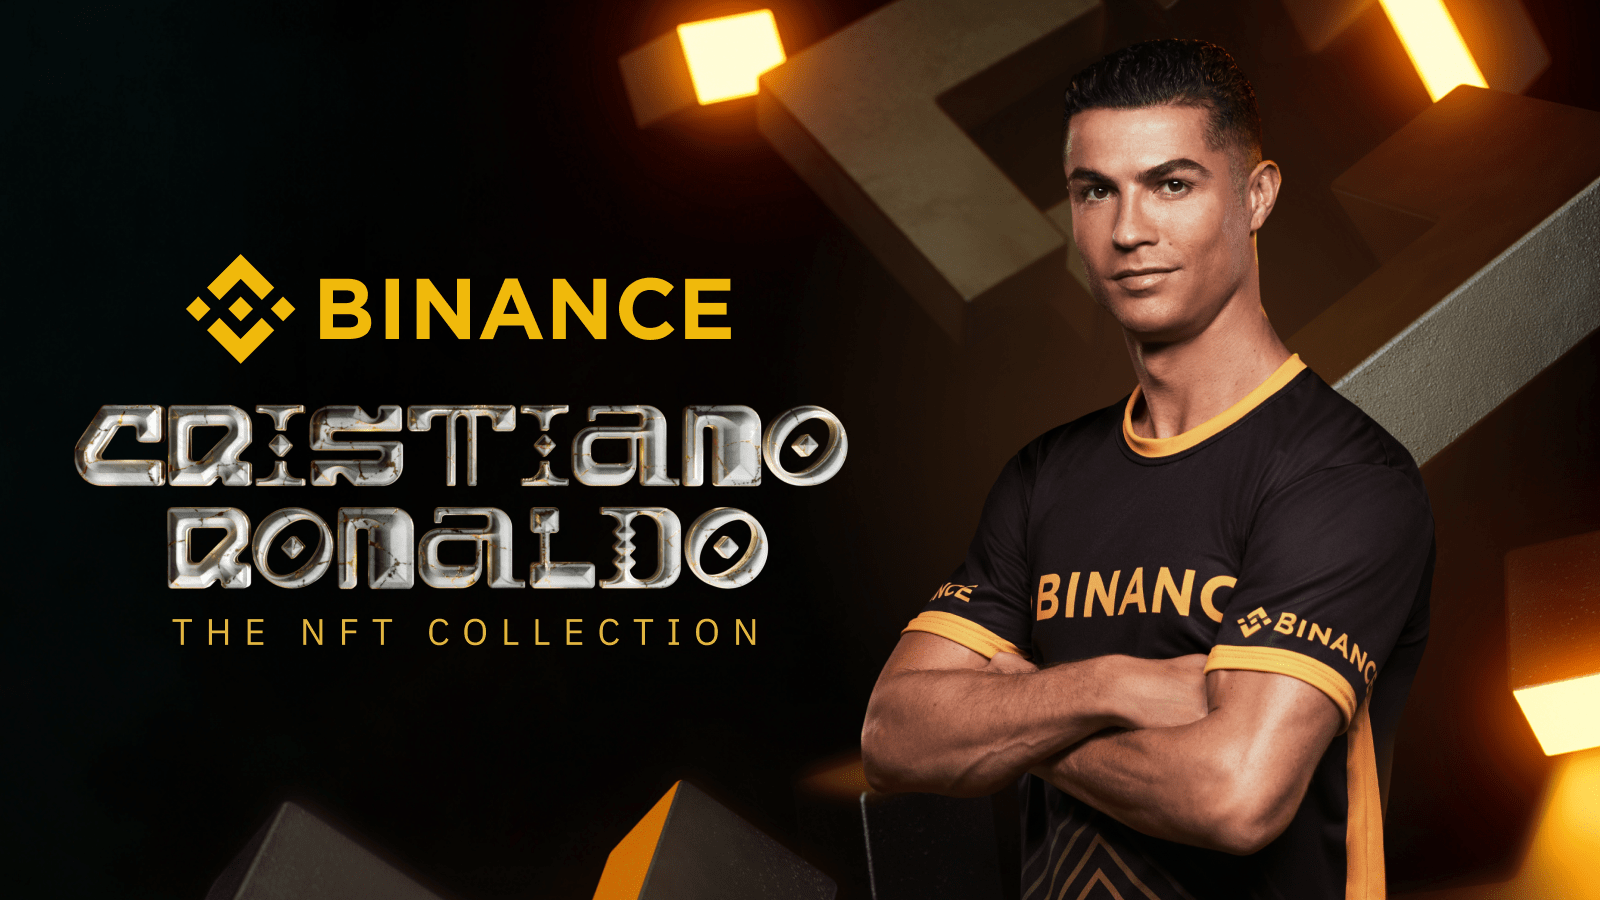 Binance launches NFT collection with Cristiano Ronaldo ahead of World Cup in Qatar